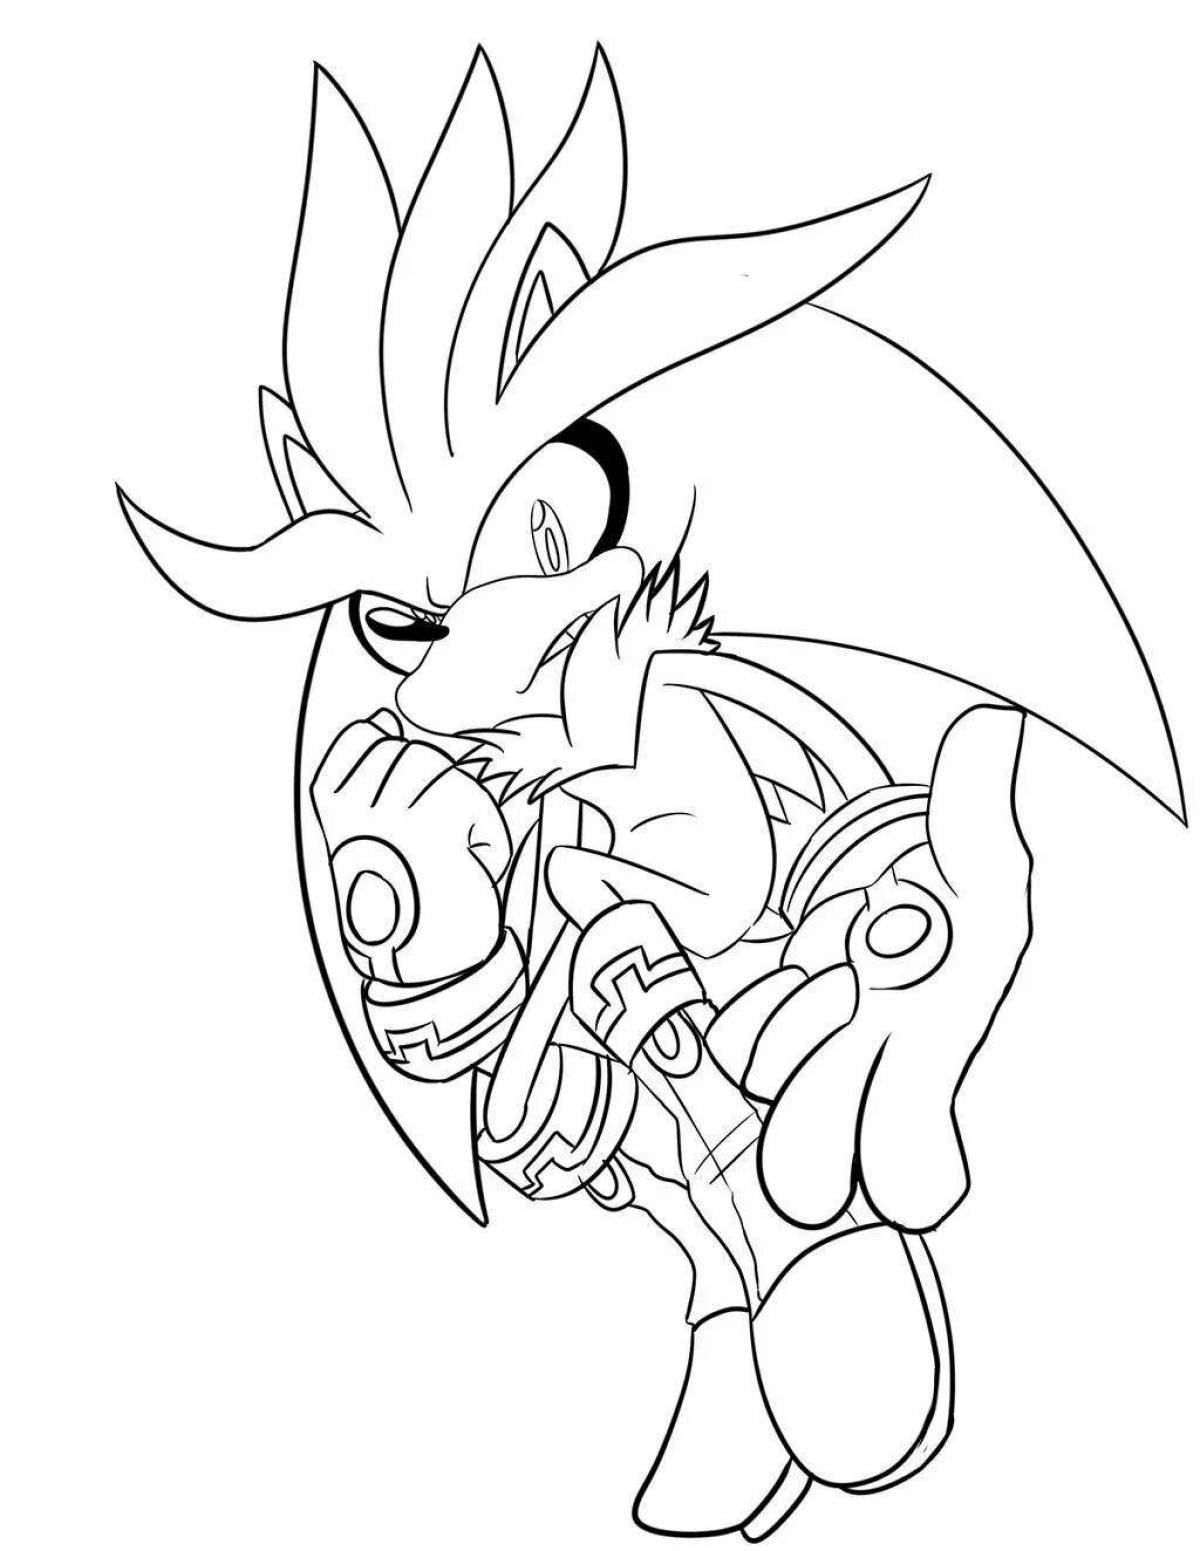 Charming sonic shredder coloring page